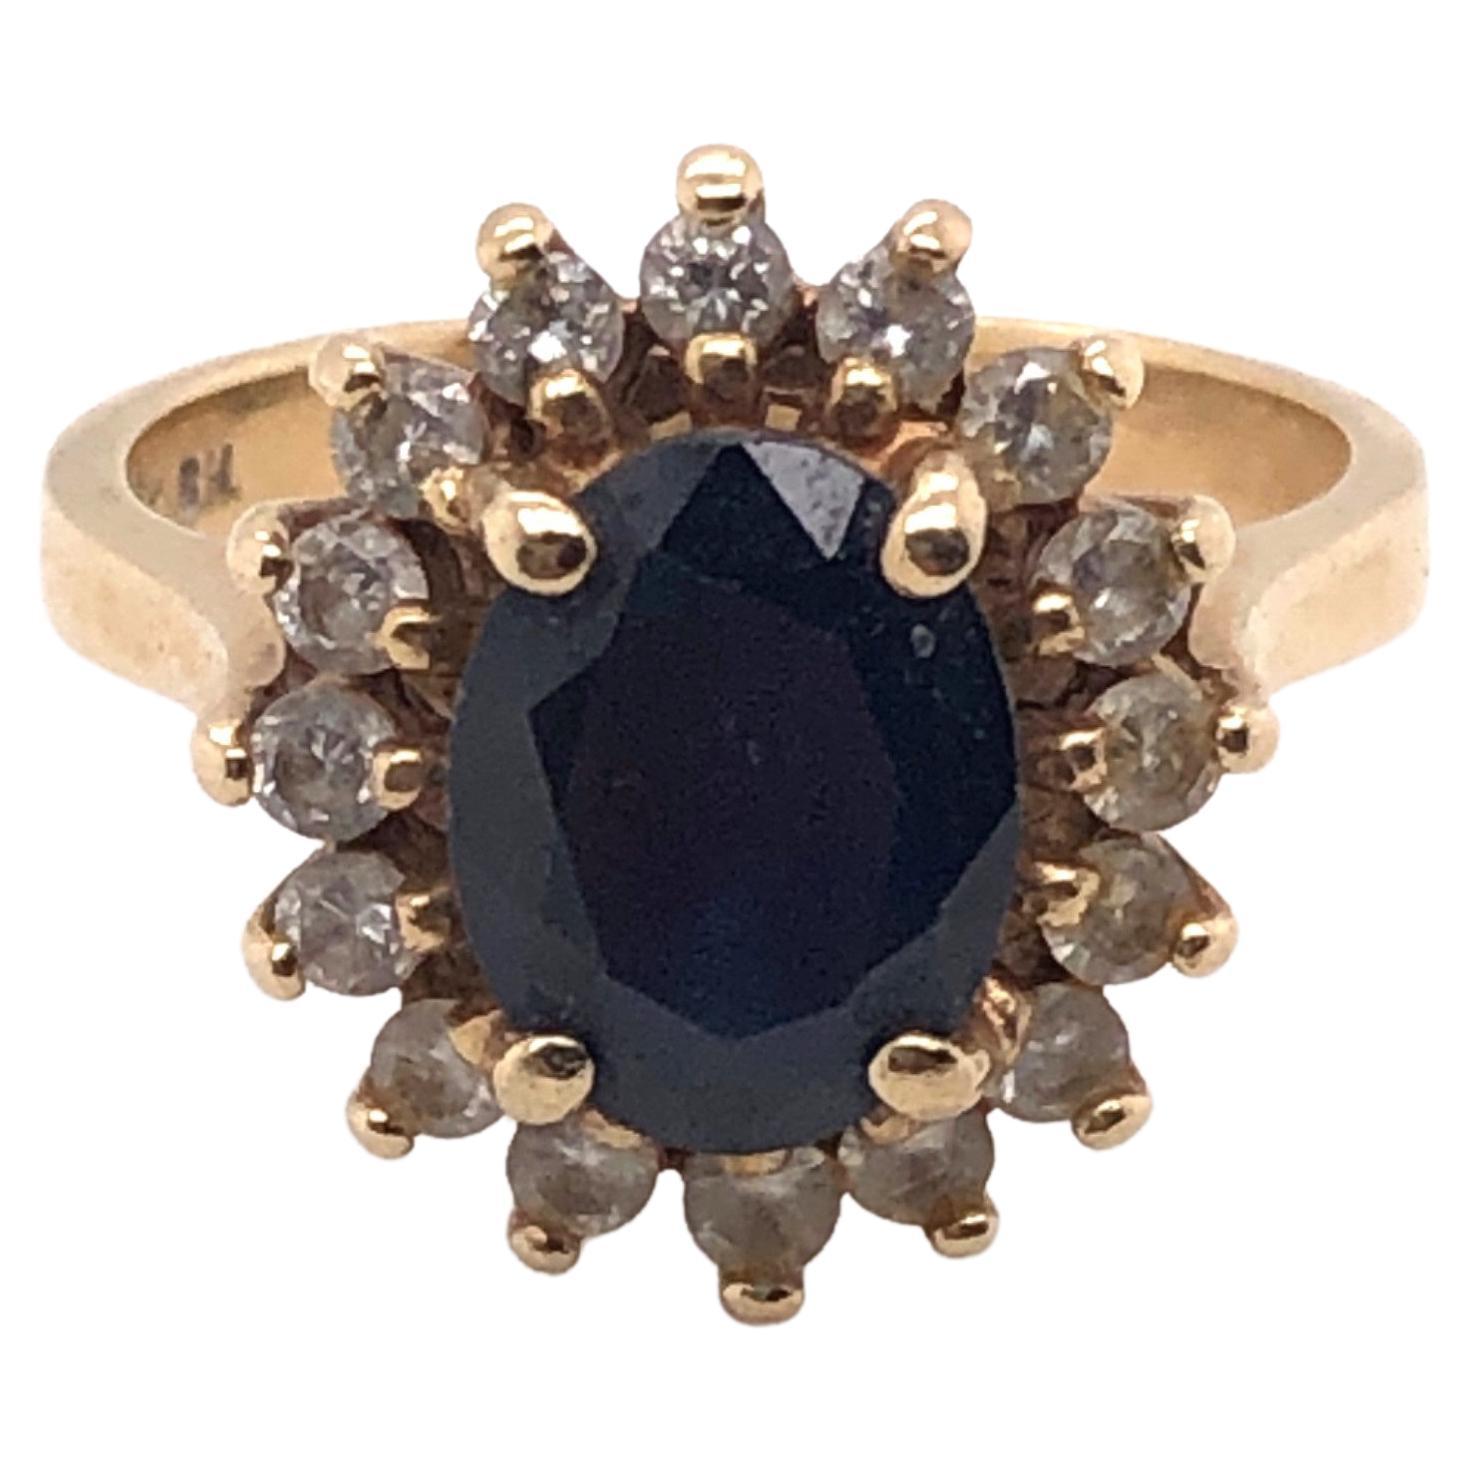 14kt yellow gold 2.68 carat Sapphire with .50 carat H-I color I1-I2  clarity Diamond Halo Ring. 

This is the classic style that Princess Diana had. 

This ring is a finger size 6.25 and can be resized if needed.